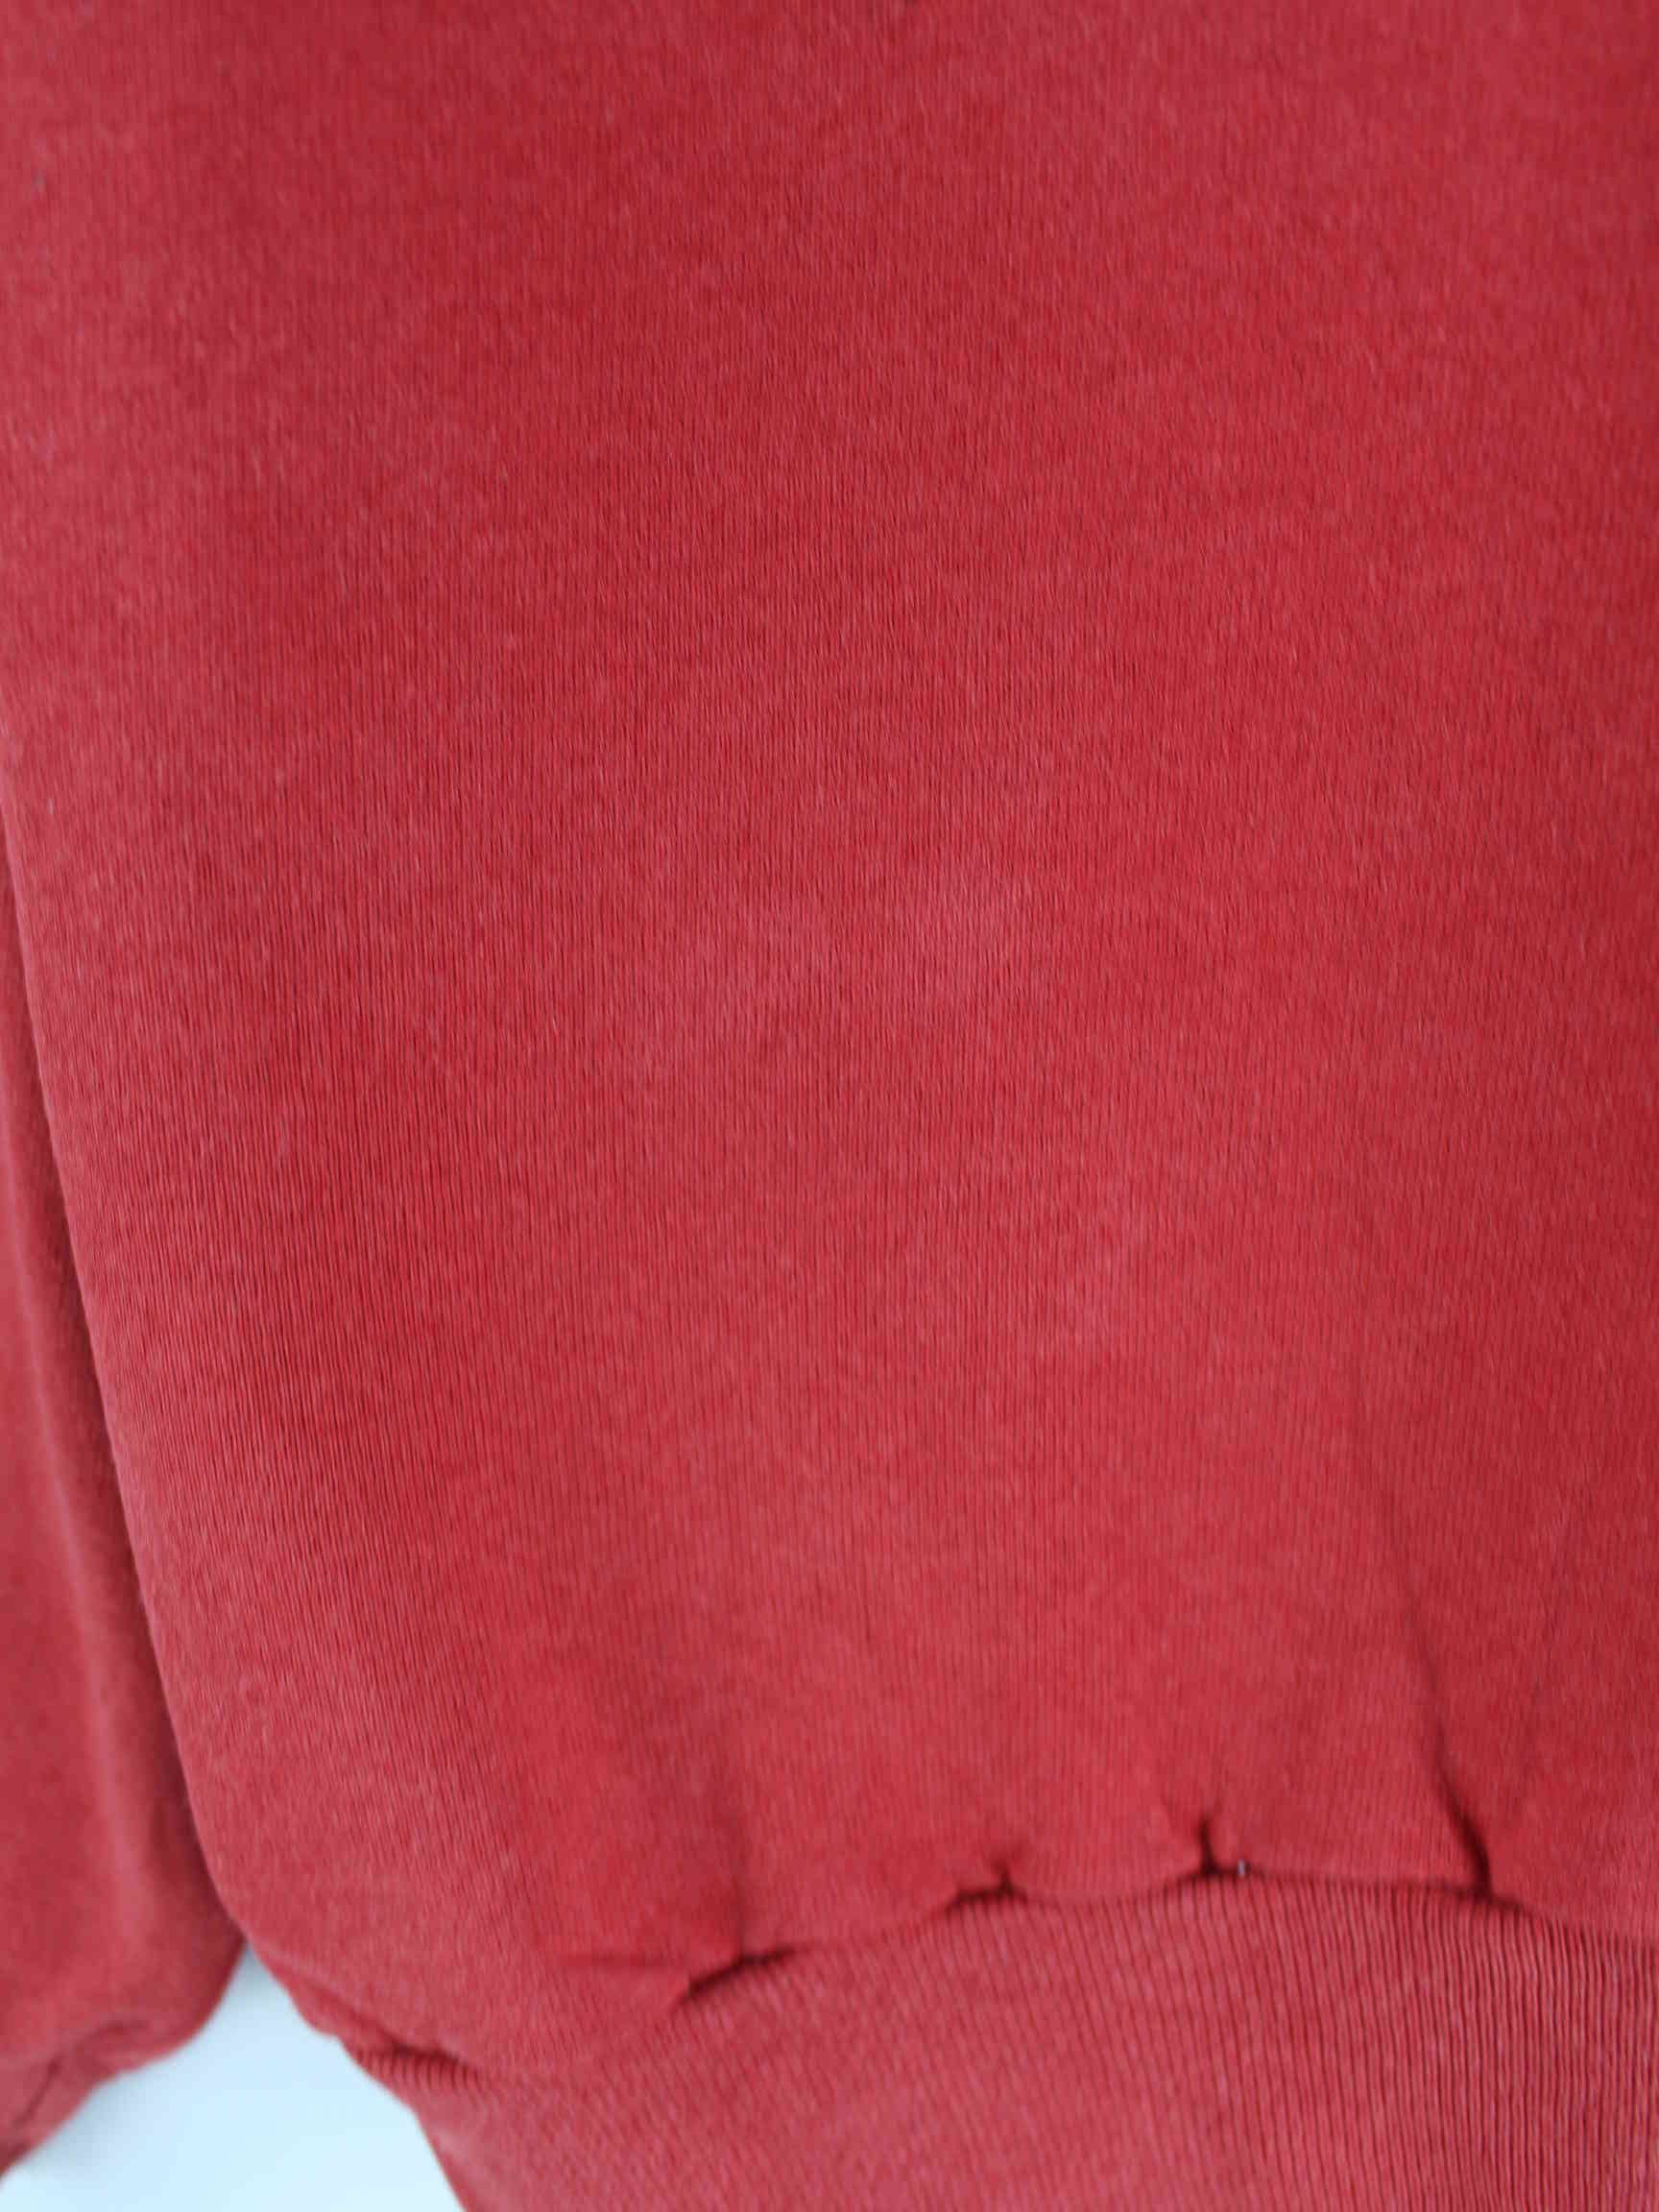 Jerzees 90s Vintage Dog Embroidered Sweater Rot XL (detail image 4)